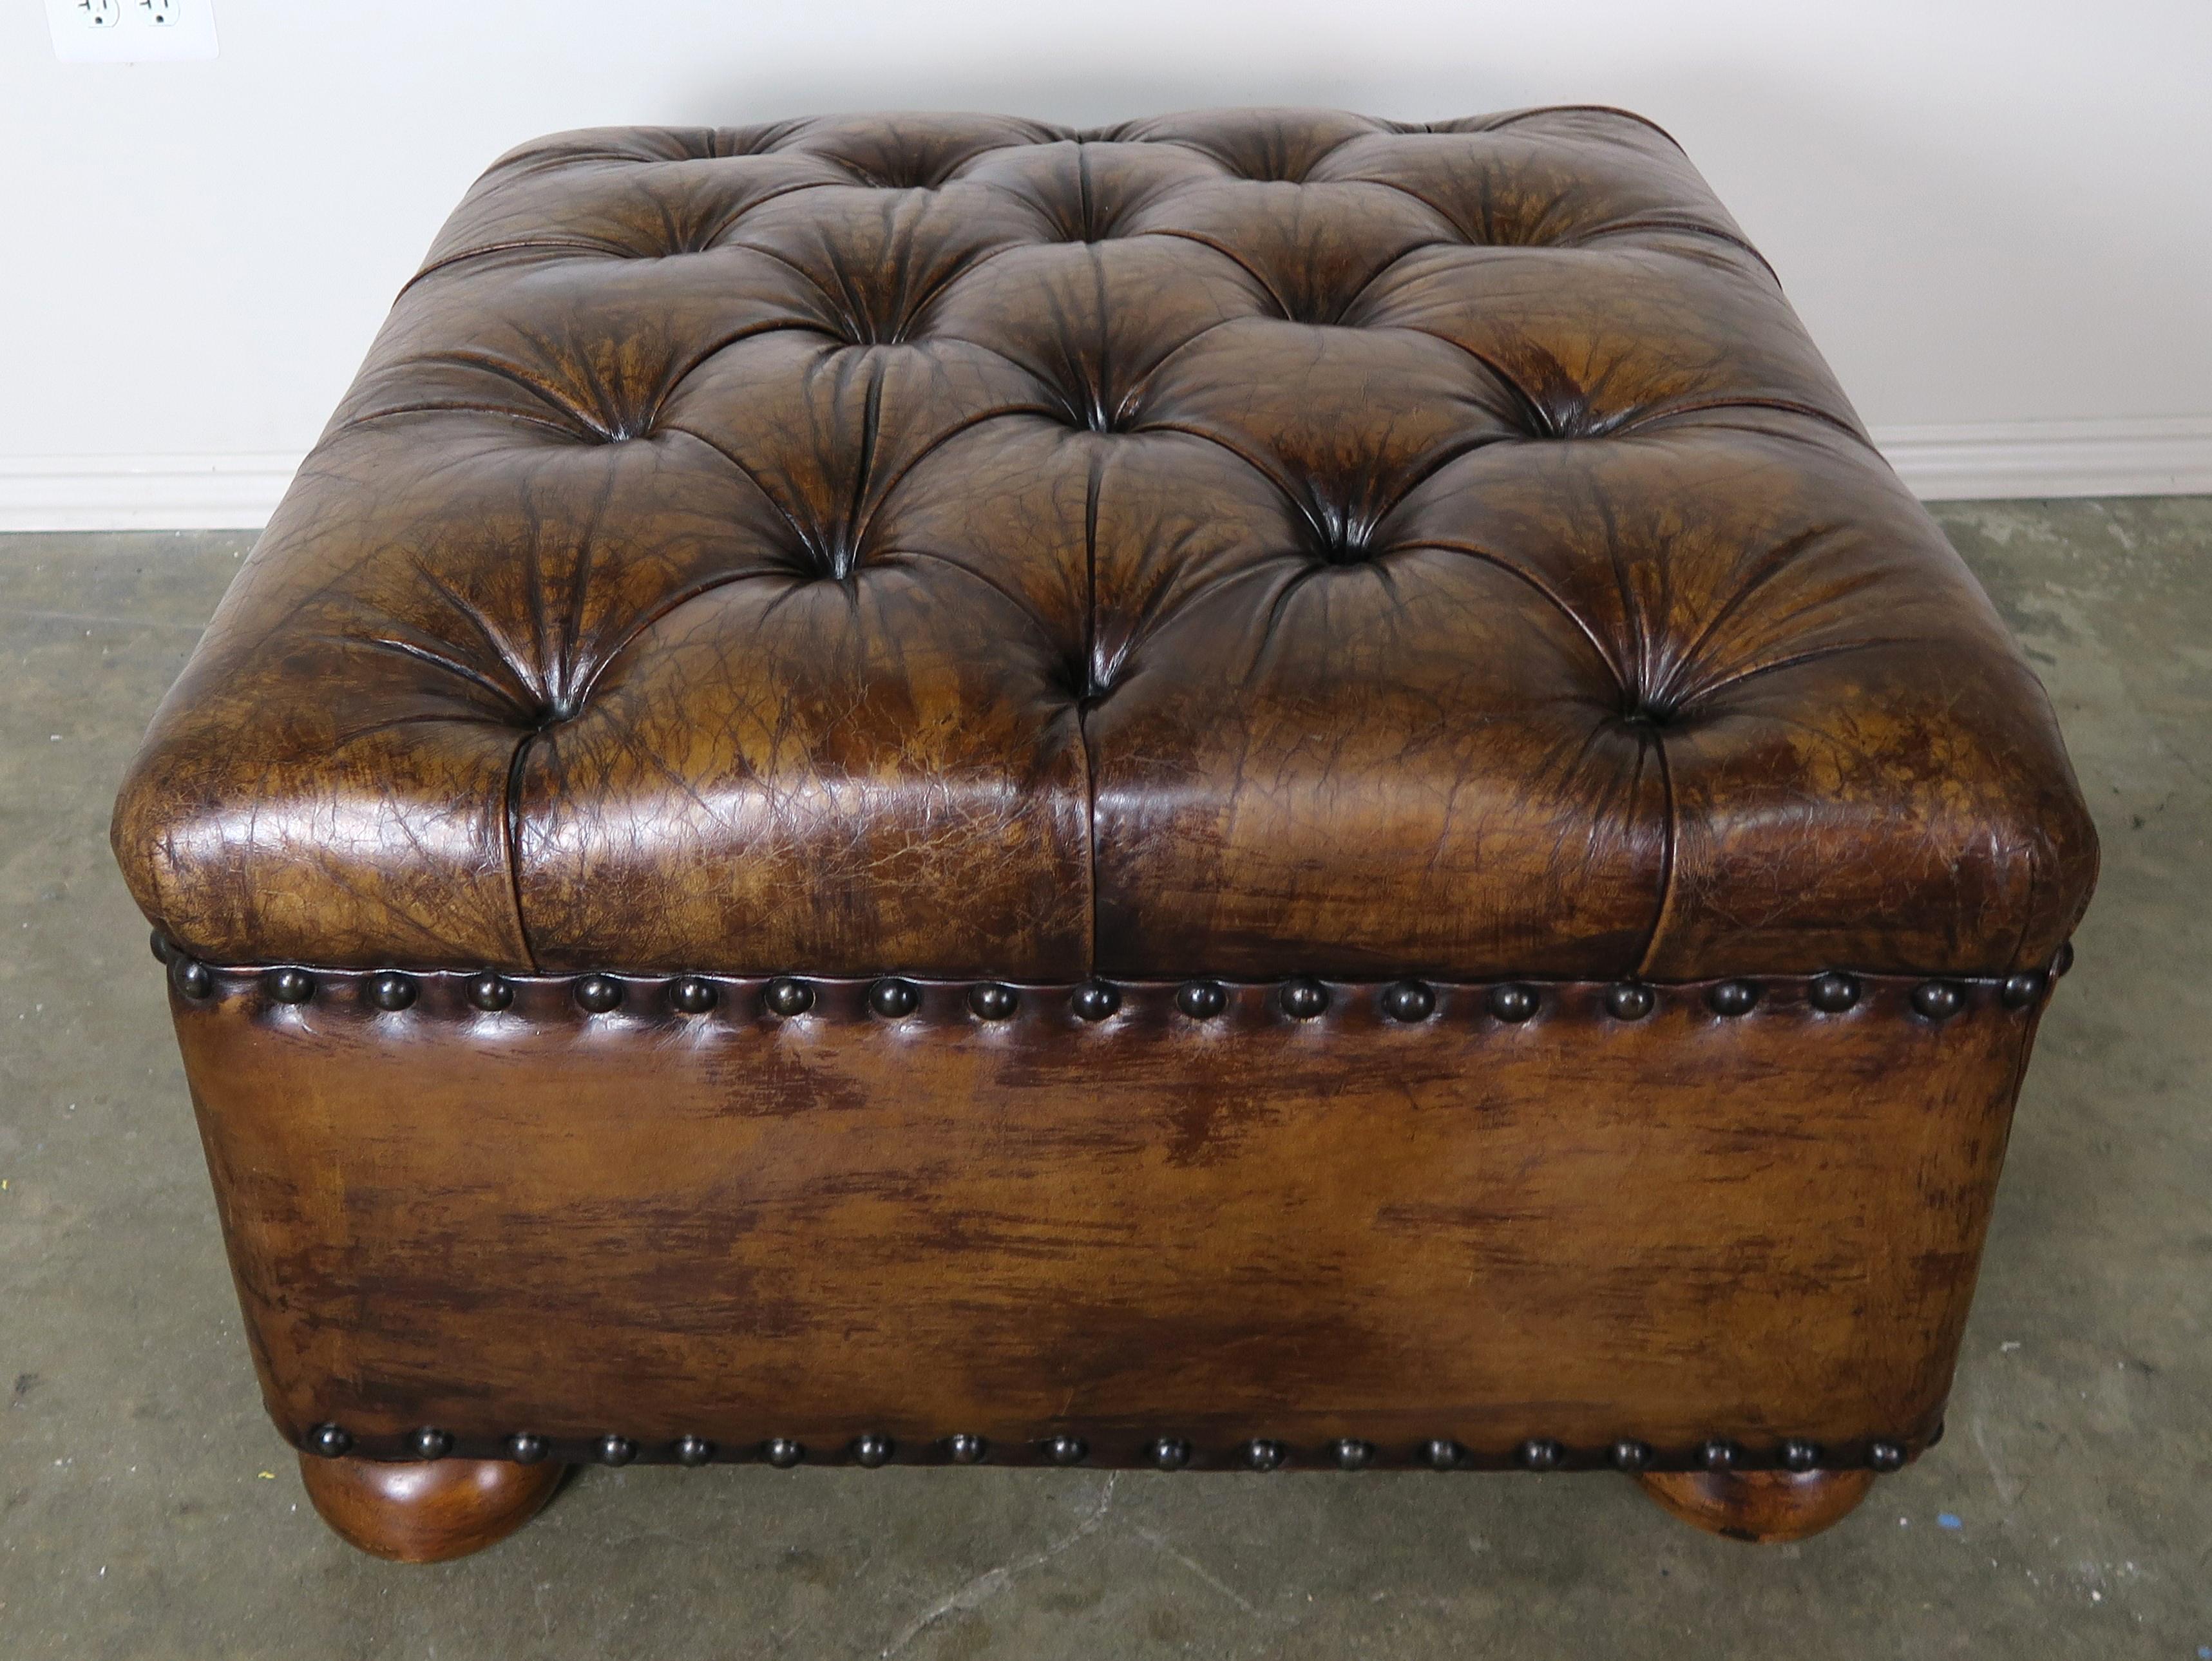 English style leather tufted bench with double row of nailhead trim detail. The bench stands on four simple bun feet. A great accent piece for any room. You can even put a tray on it and use it as your coffee table.